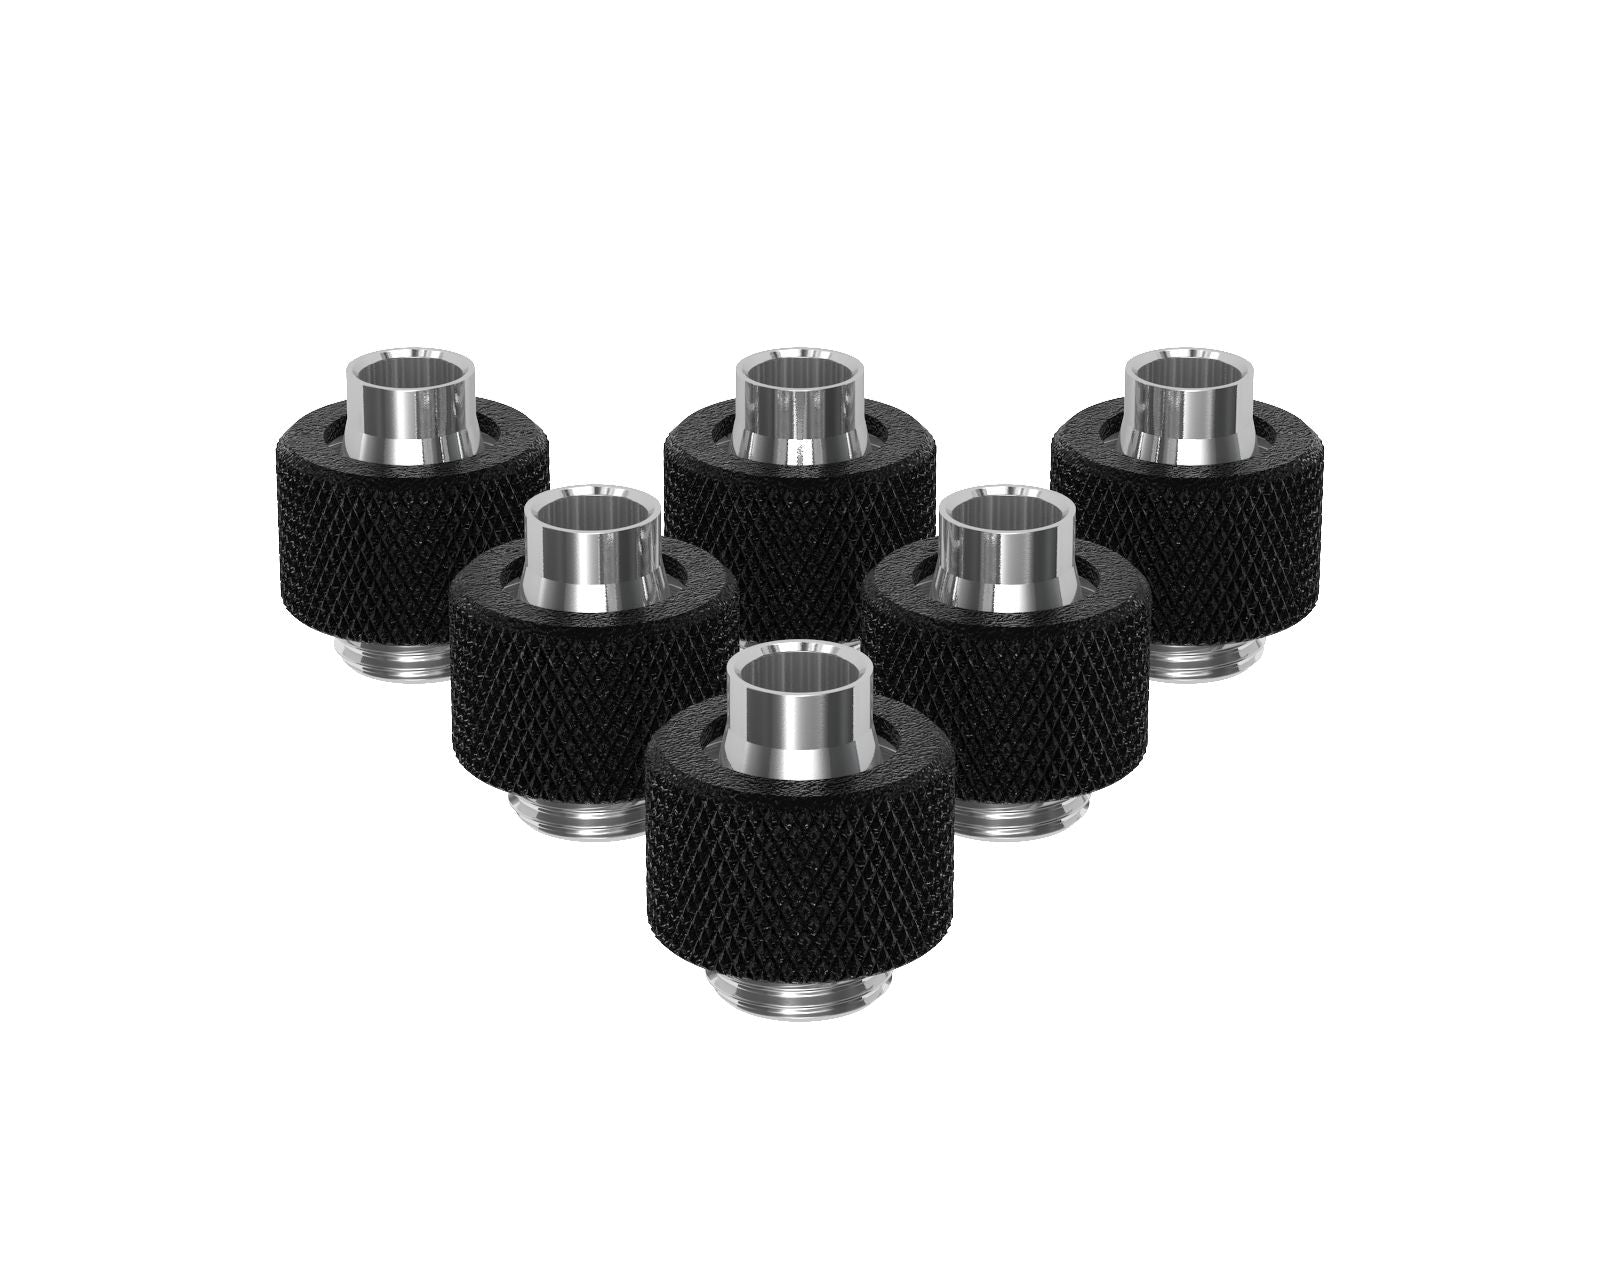 PrimoChill SecureFit SX - Premium Compression Fitting For 3/8in ID x 1/2in OD Flexible Tubing 6 Pack (F-SFSX12-6) - Available in 20+ Colors, Custom Watercooling Loop Ready - TX Matte Black